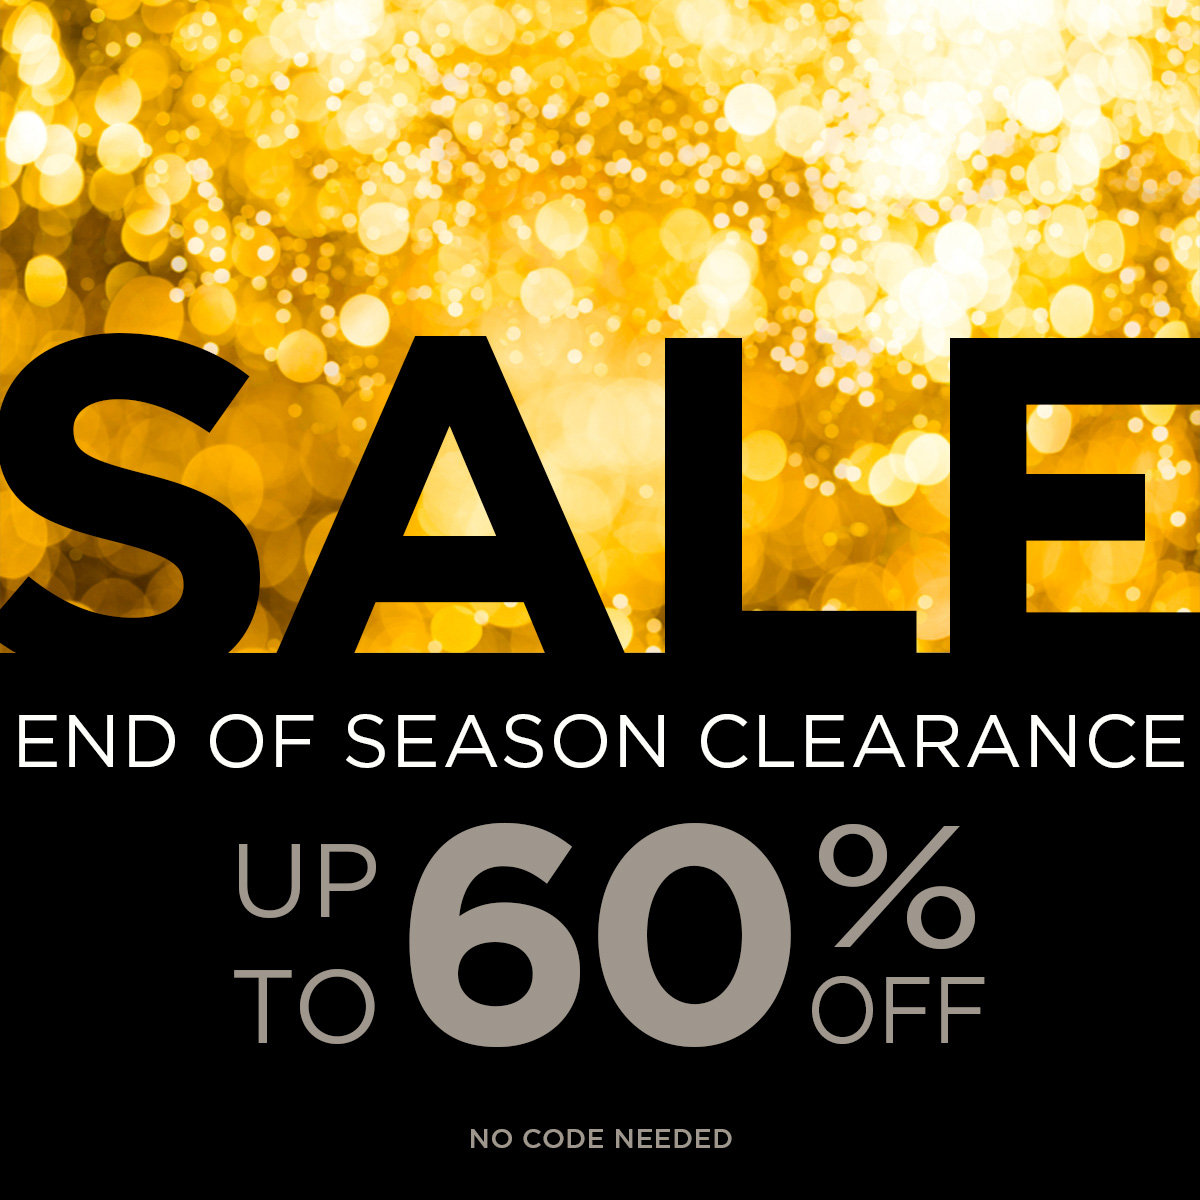 Last day to get up to 60% off on end of season styles. Sale ends tonight at midnight.